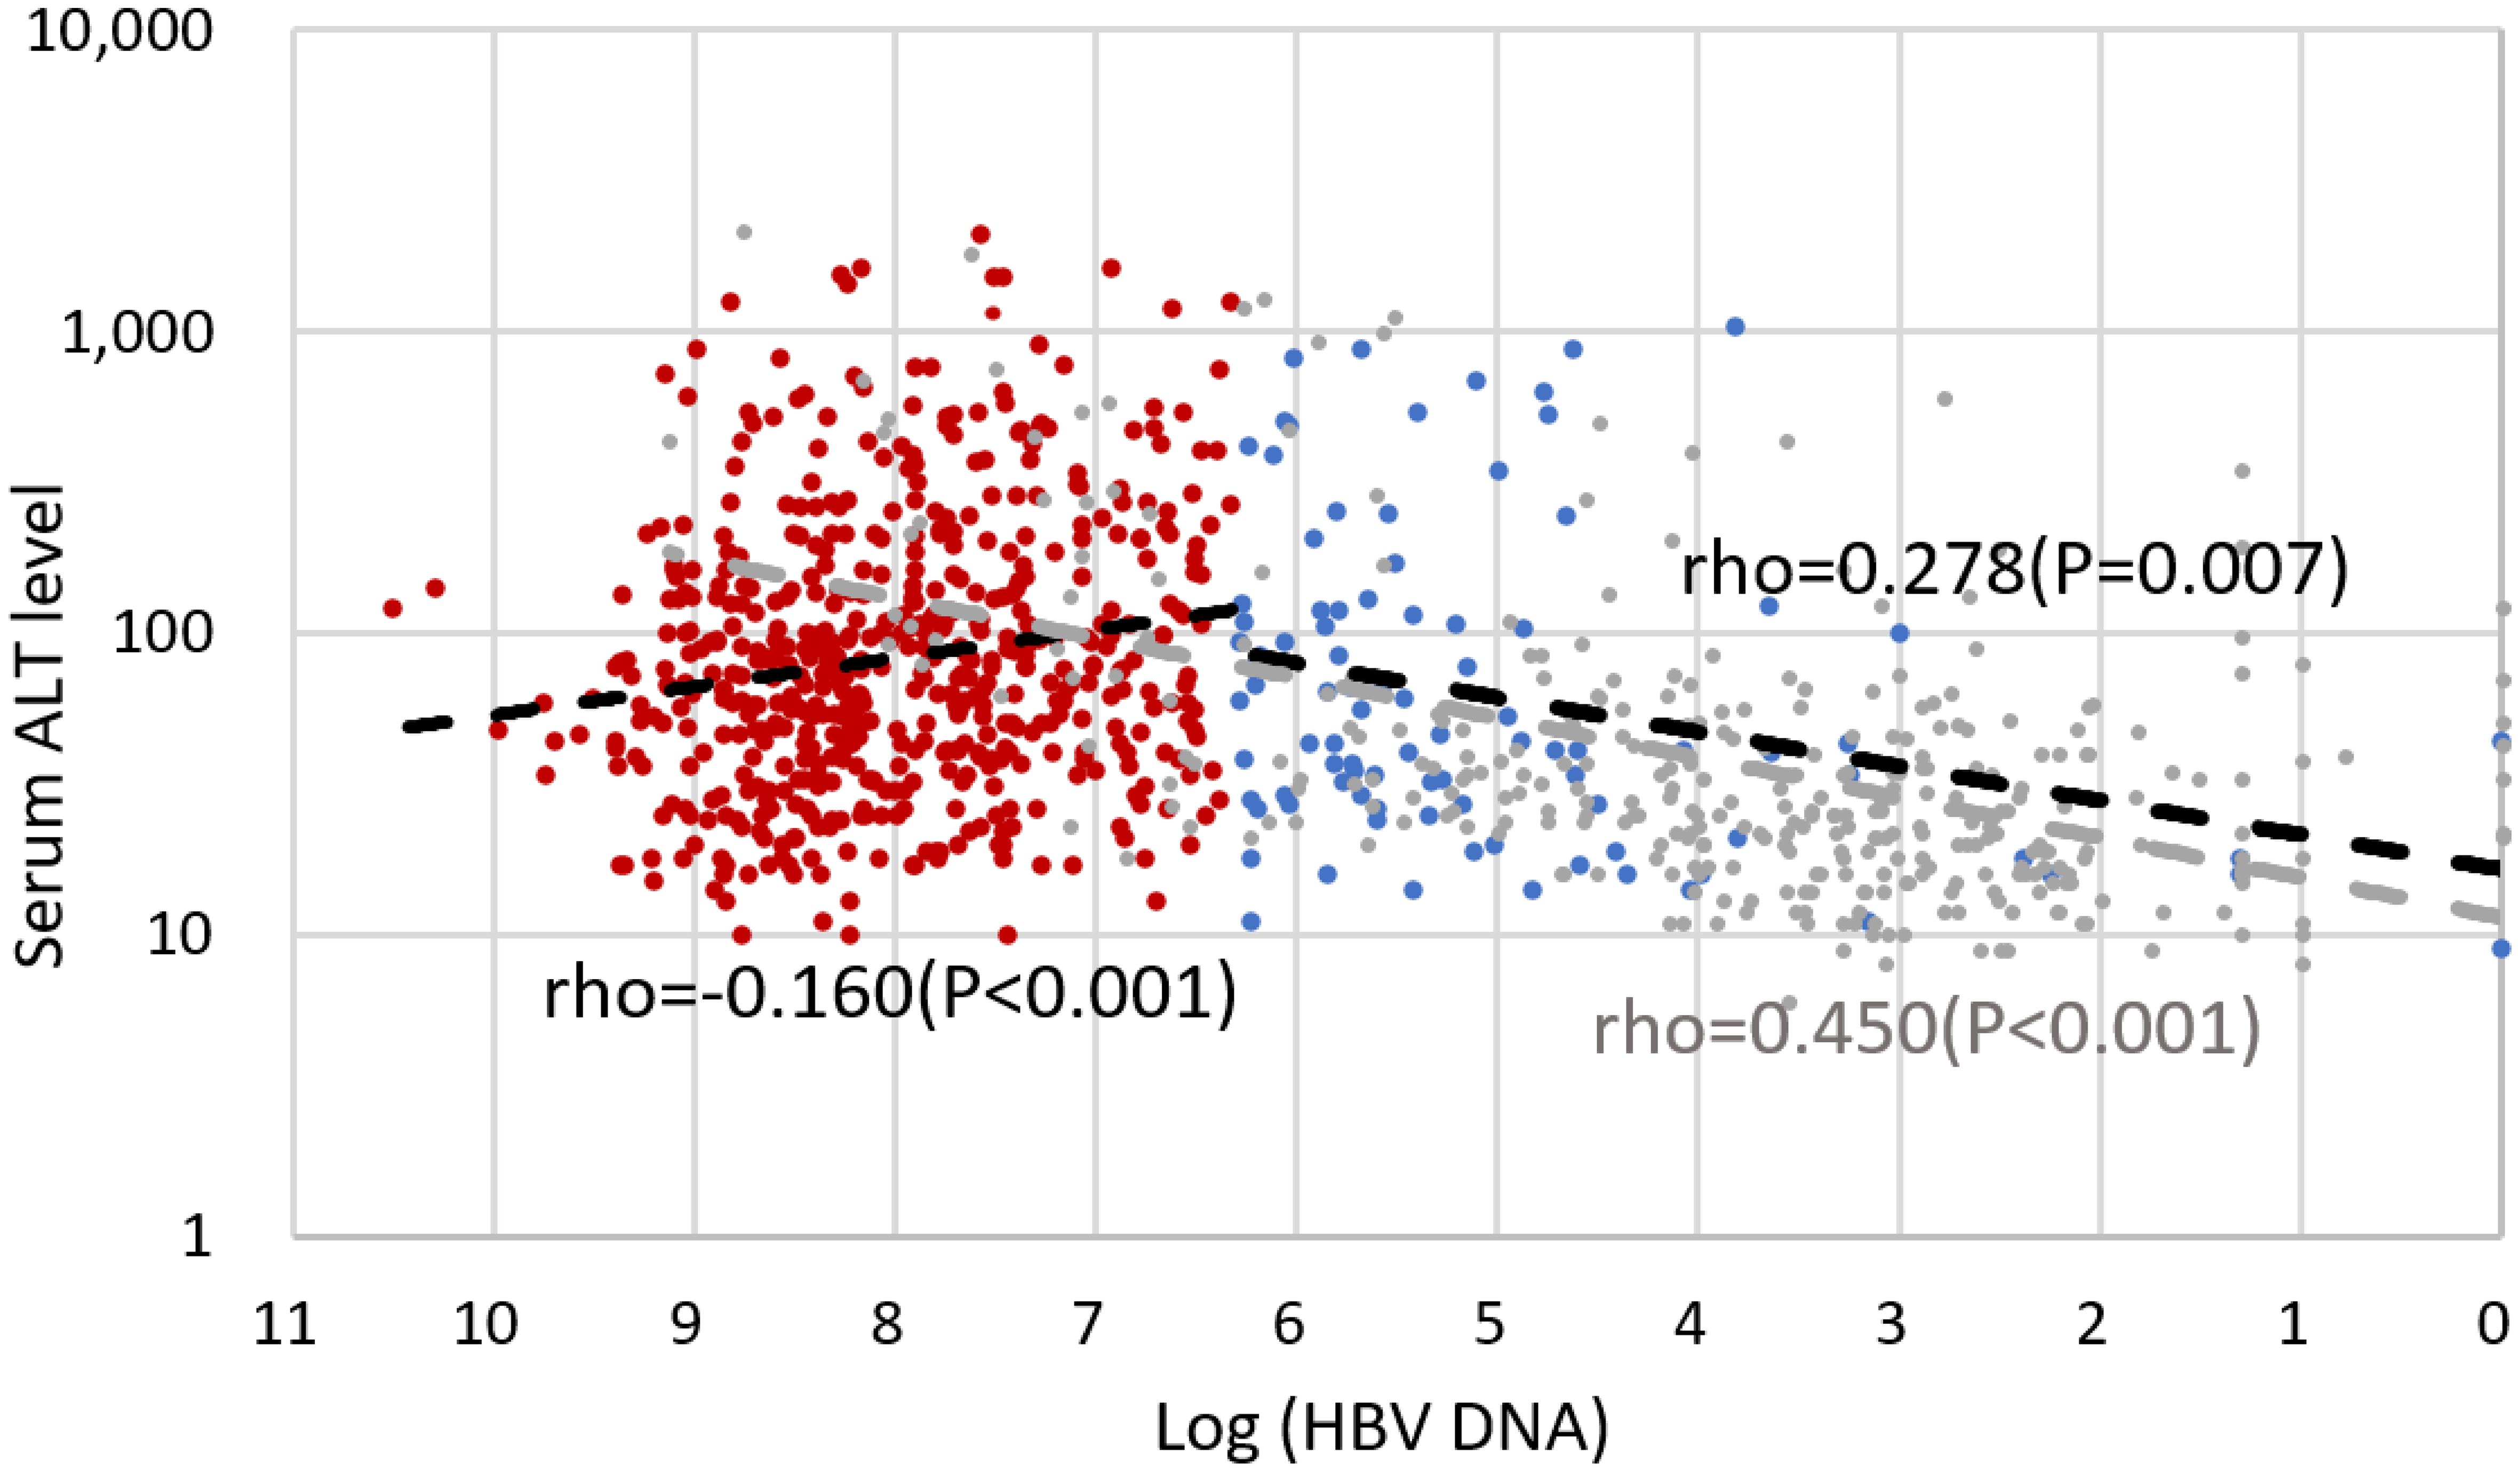 Scatter plots between serum HBV DNA and ALT of CHB patients with different HBV DNA levels and HBeAg status in cohort A.